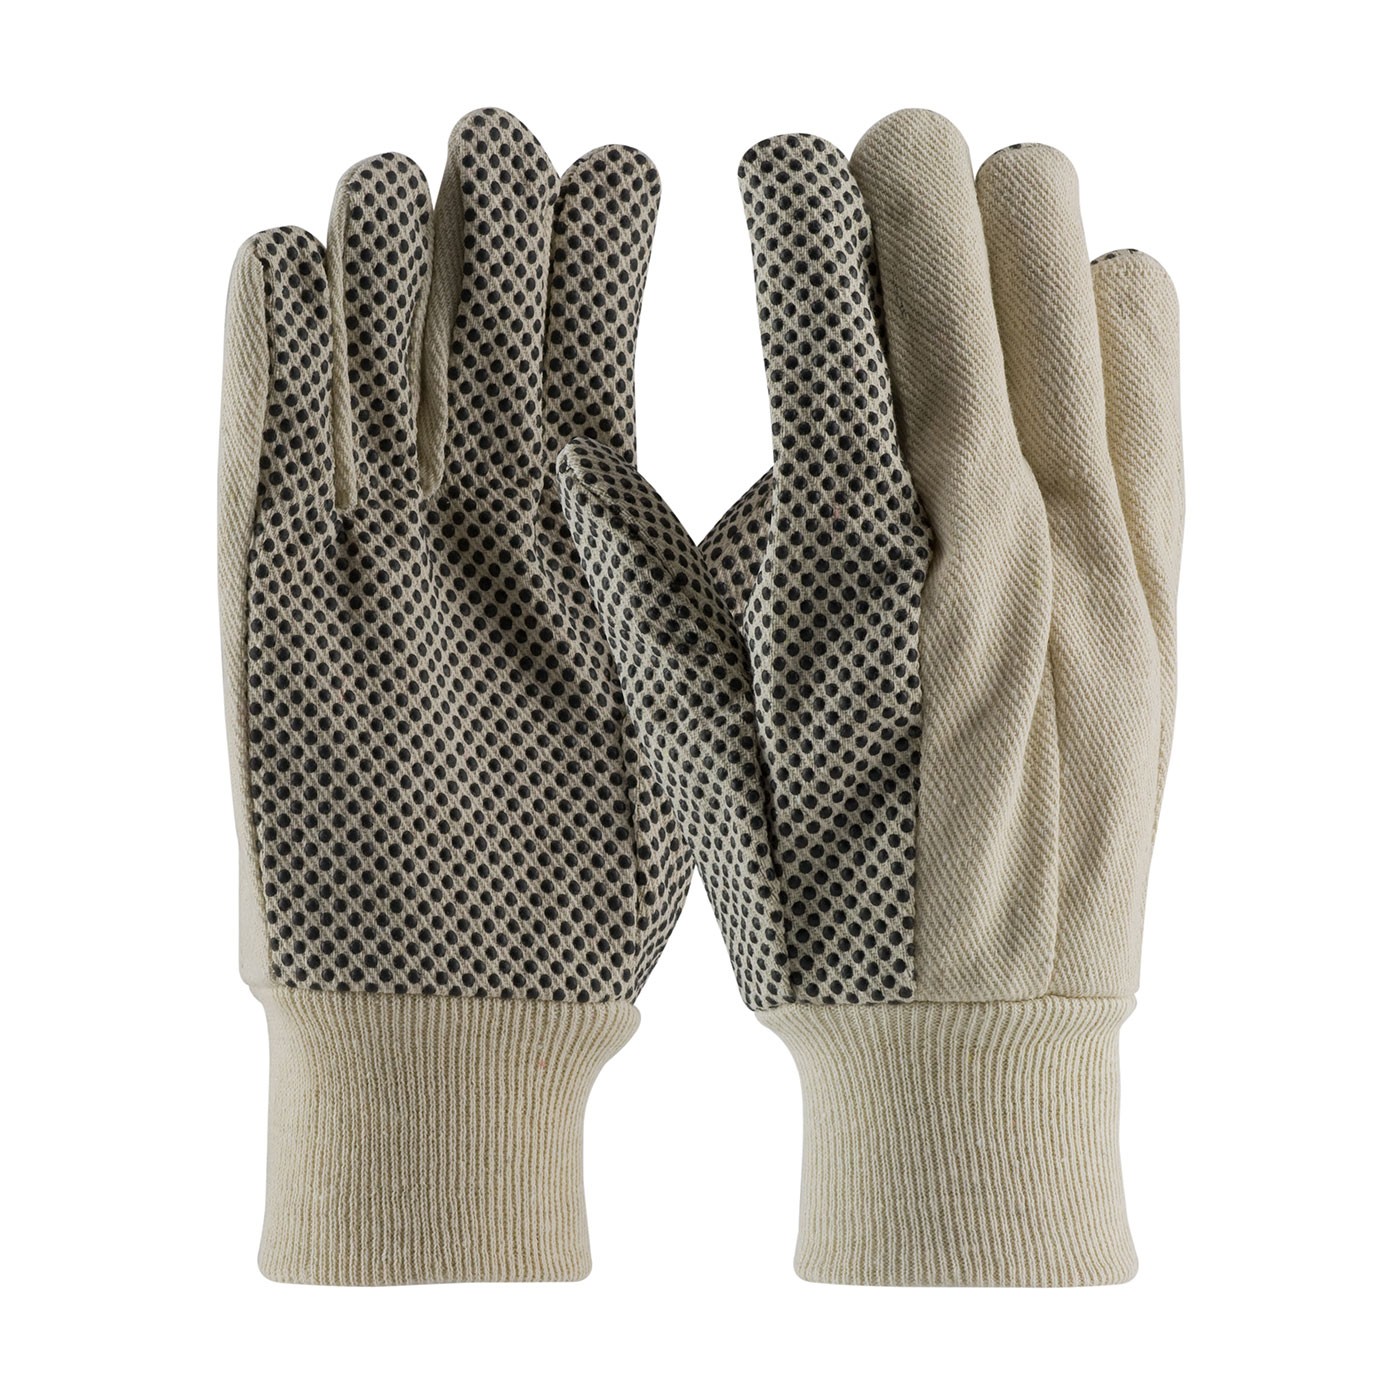 PIP® Economy Grade Cotton Canvas Glove with PVC Dot Grip on Palm, Thumb and Forefinger - 10 oz  (#91-910PDI)